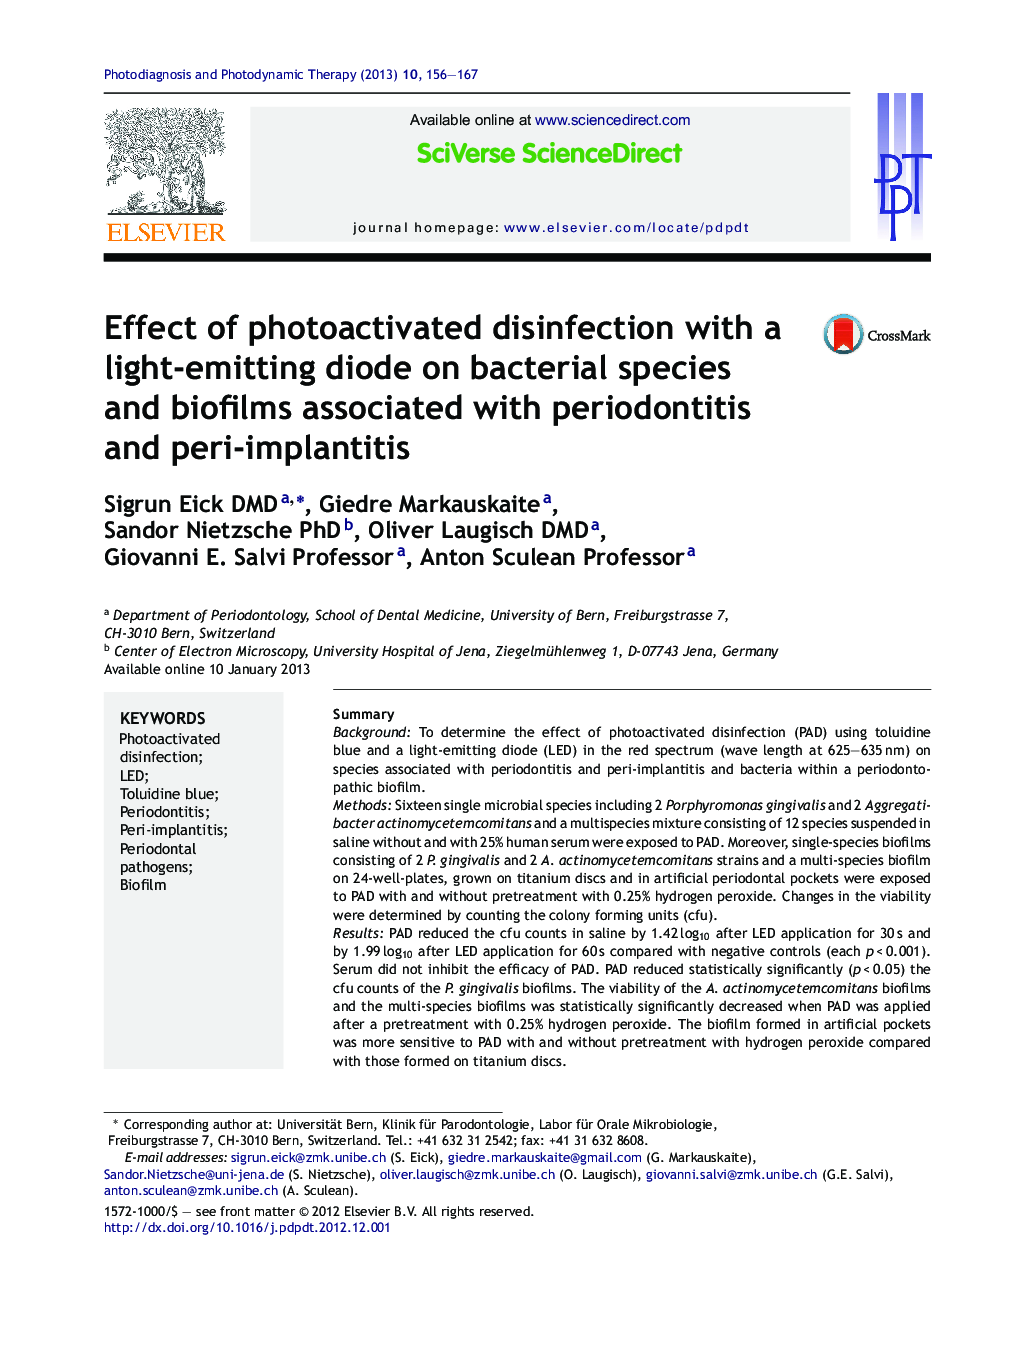 Effect of photoactivated disinfection with a light-emitting diode on bacterial species and biofilms associated with periodontitis and peri-implantitis